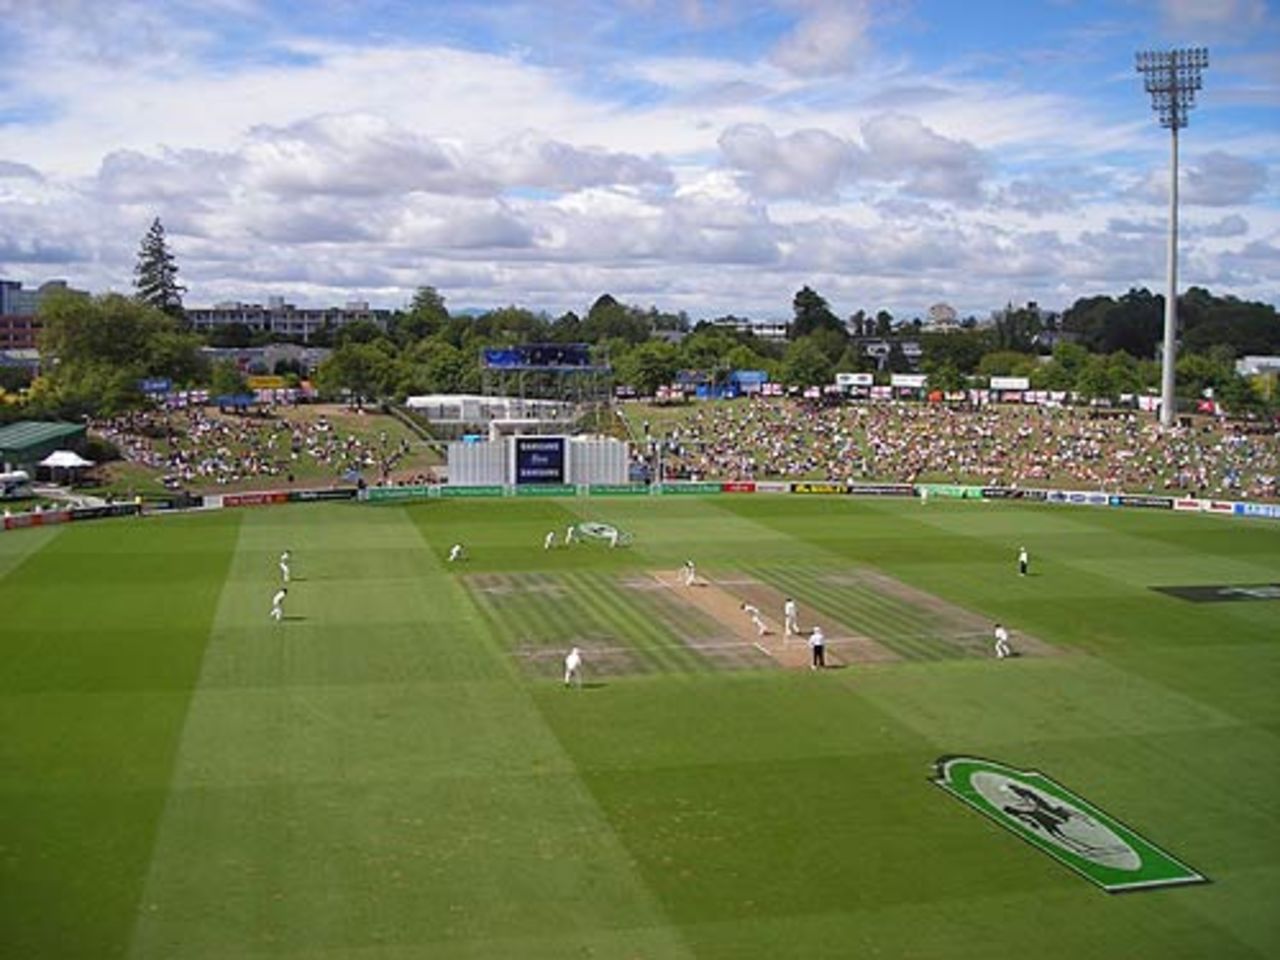 An aerial view of Seddon Park, the venue for the first Test, New Zealand v England, 1st Test, Hamilton, March 5, 2008